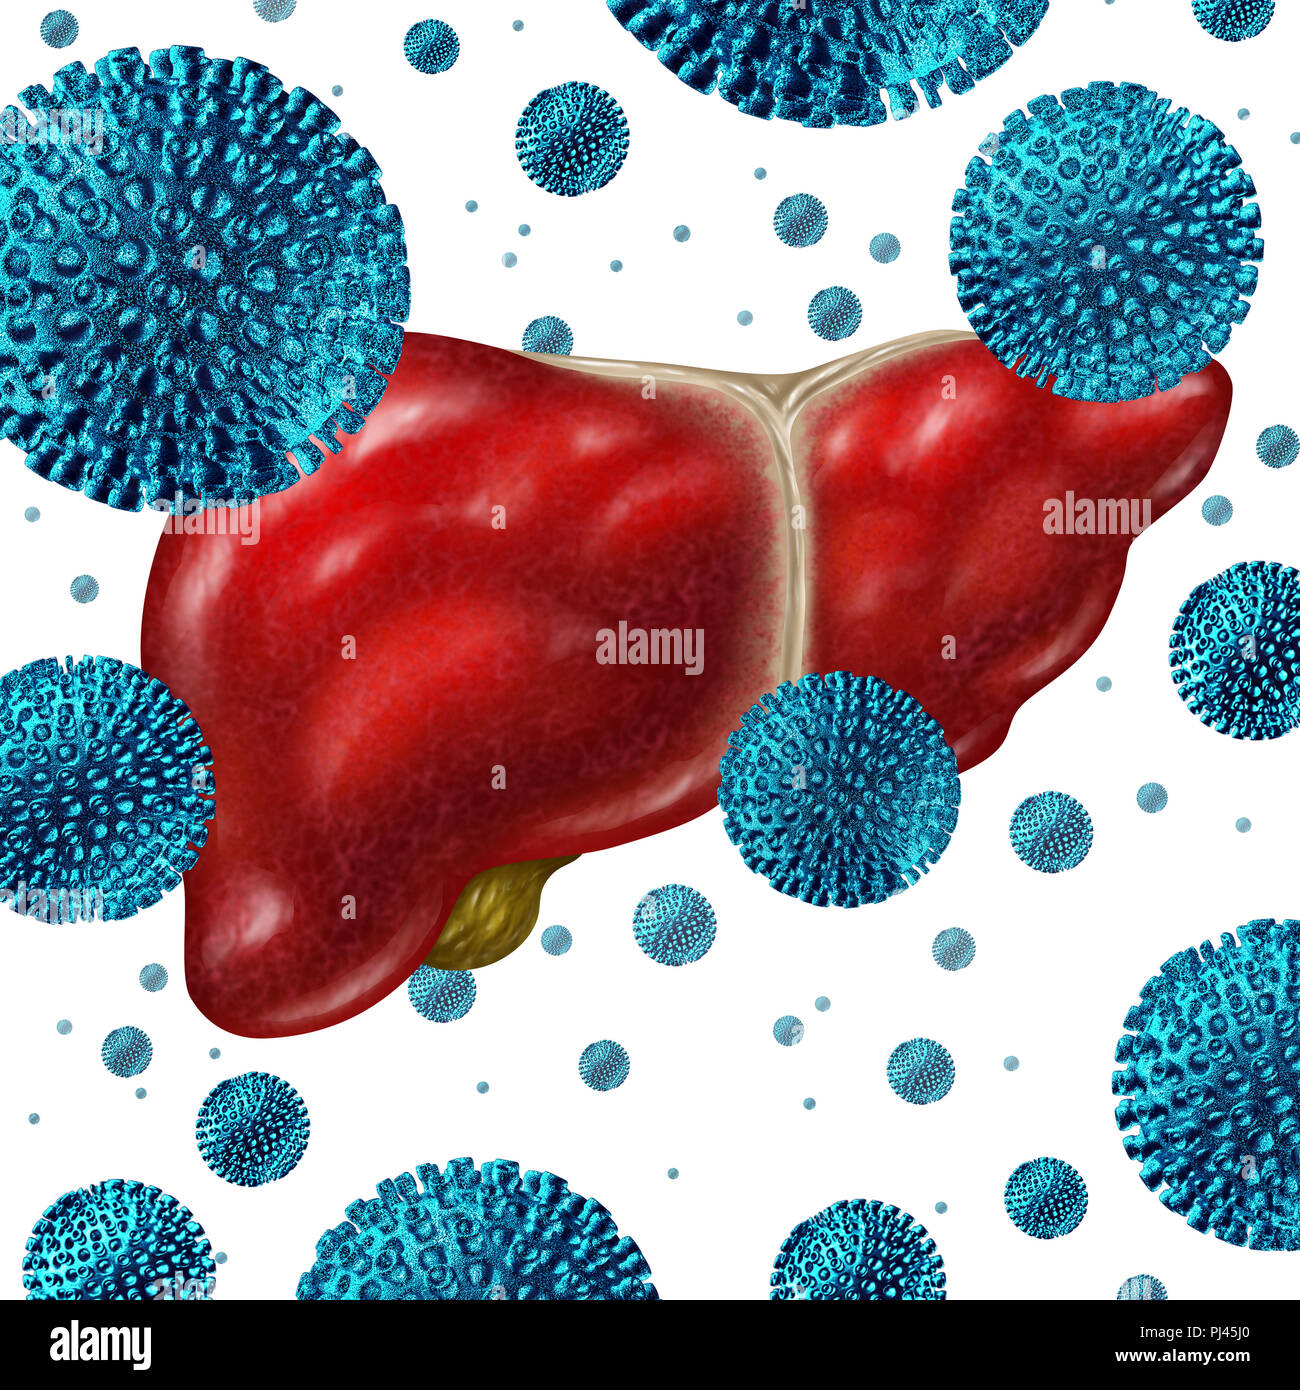 Hepatitis C disease concept as a group of three dimensional human virus cells on a human liver as a medical illustration for a viral infection. Stock Photo